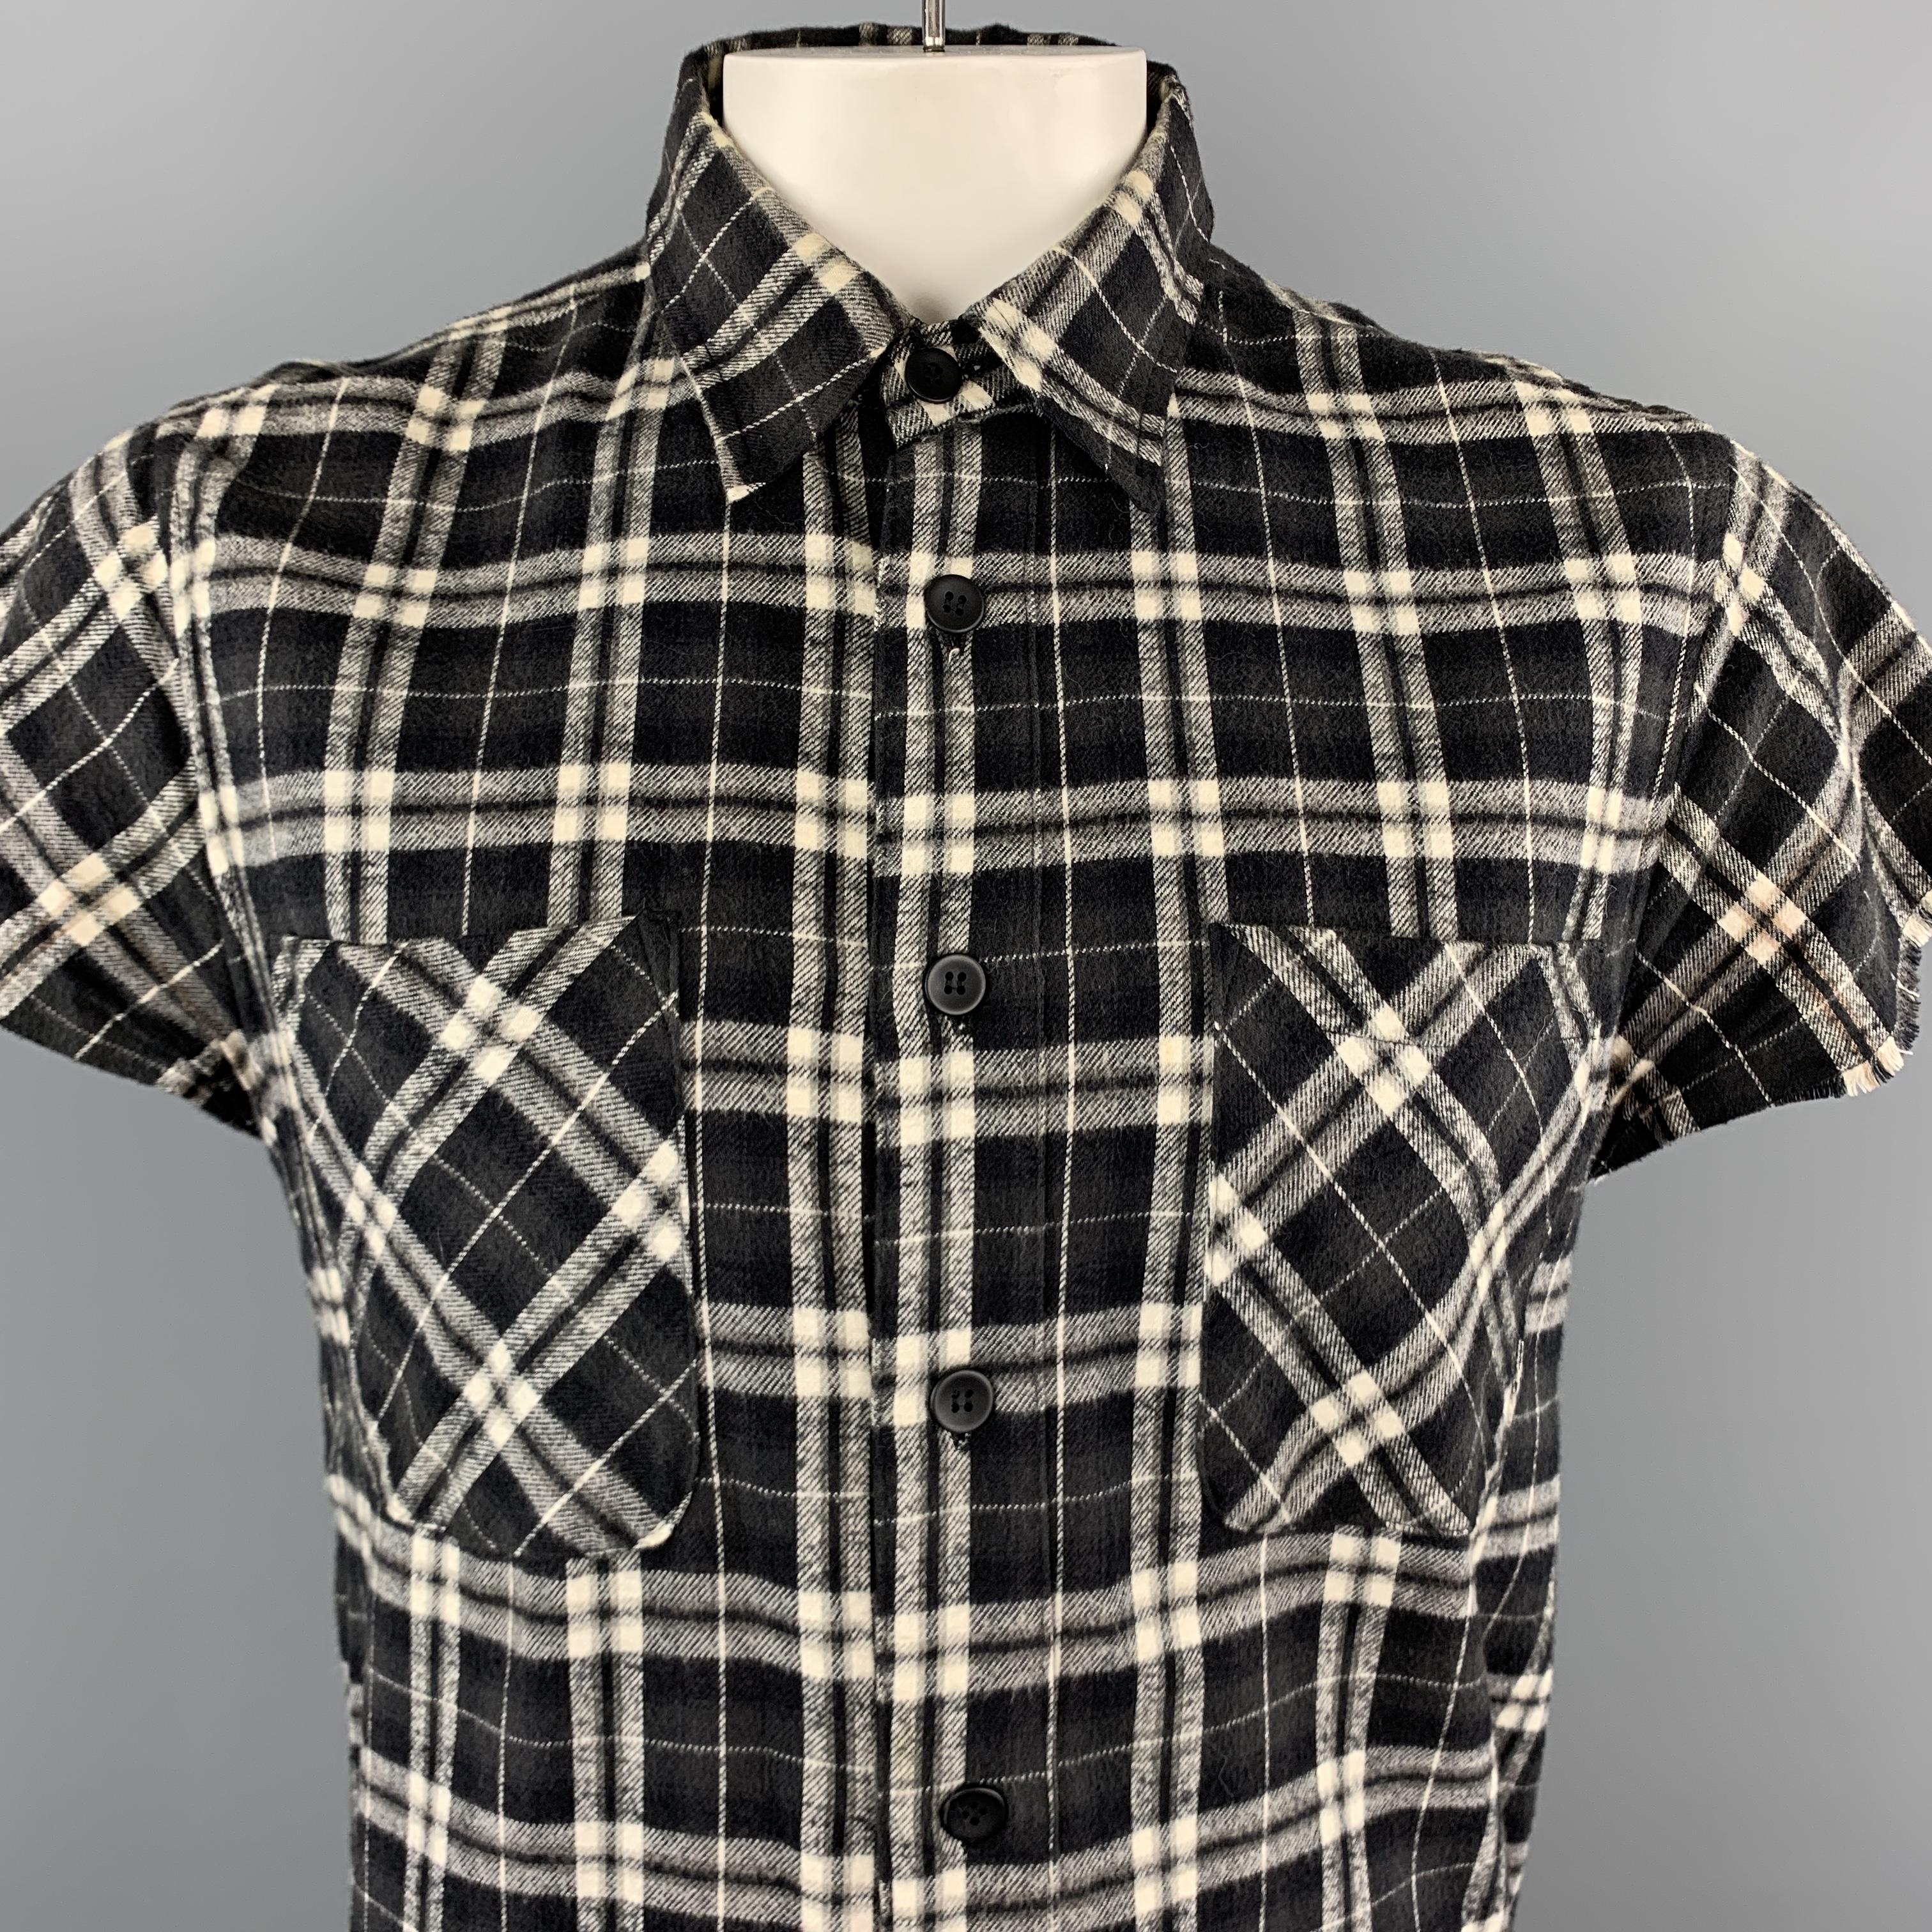 FEAR OF GOD Third Collection 2014-2015 flannel comes in black and white plaid cotton wool blend tartain with a pointed collar, double patch breast pockets, raw edge cropped sleeves, and side zips. Made in USA.

Excellent Pre-Owned Condition.
Marked: